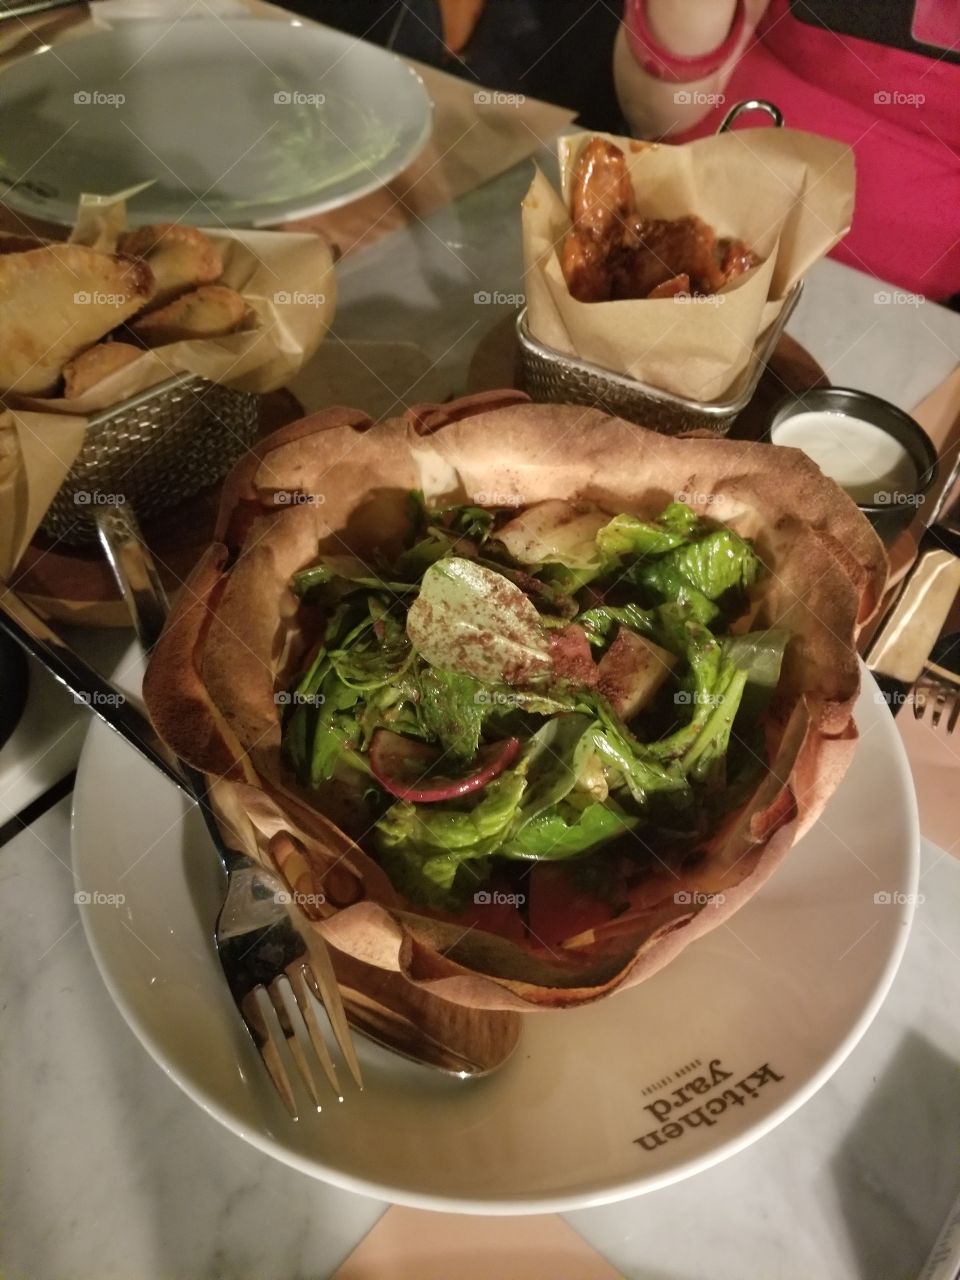 Fattoush is a Levantine bread salad made from toasted or fried pieces of Arabic flat bread combined with mixed greens and other vegetables, such as radishes and tomatoes. Lebanese Food is a must try